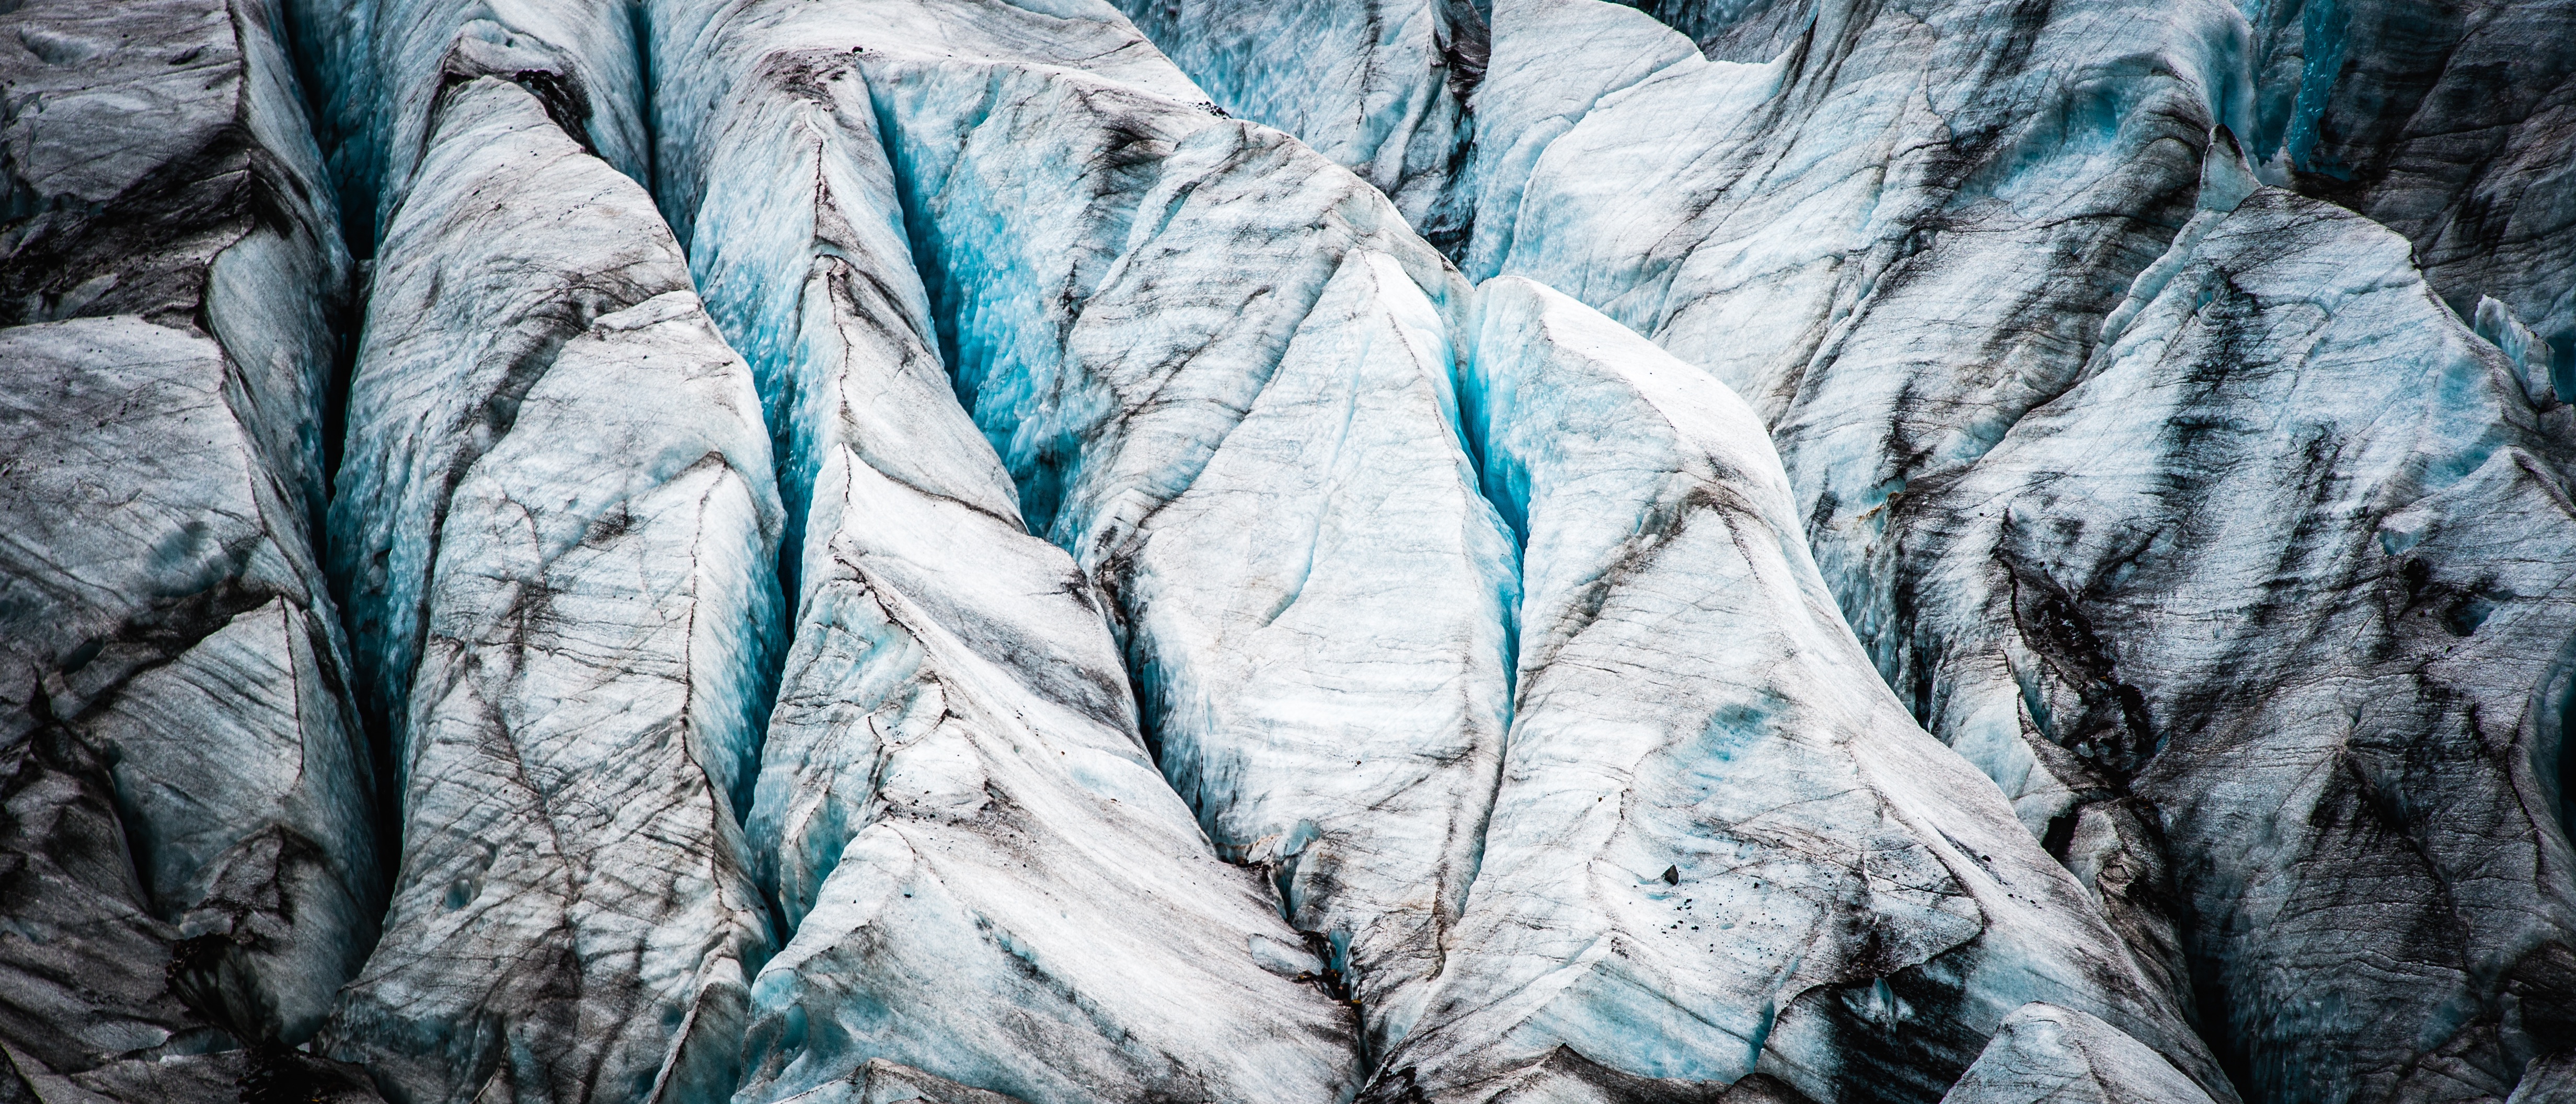 The deep blue crevices of an Icelandic glacier.